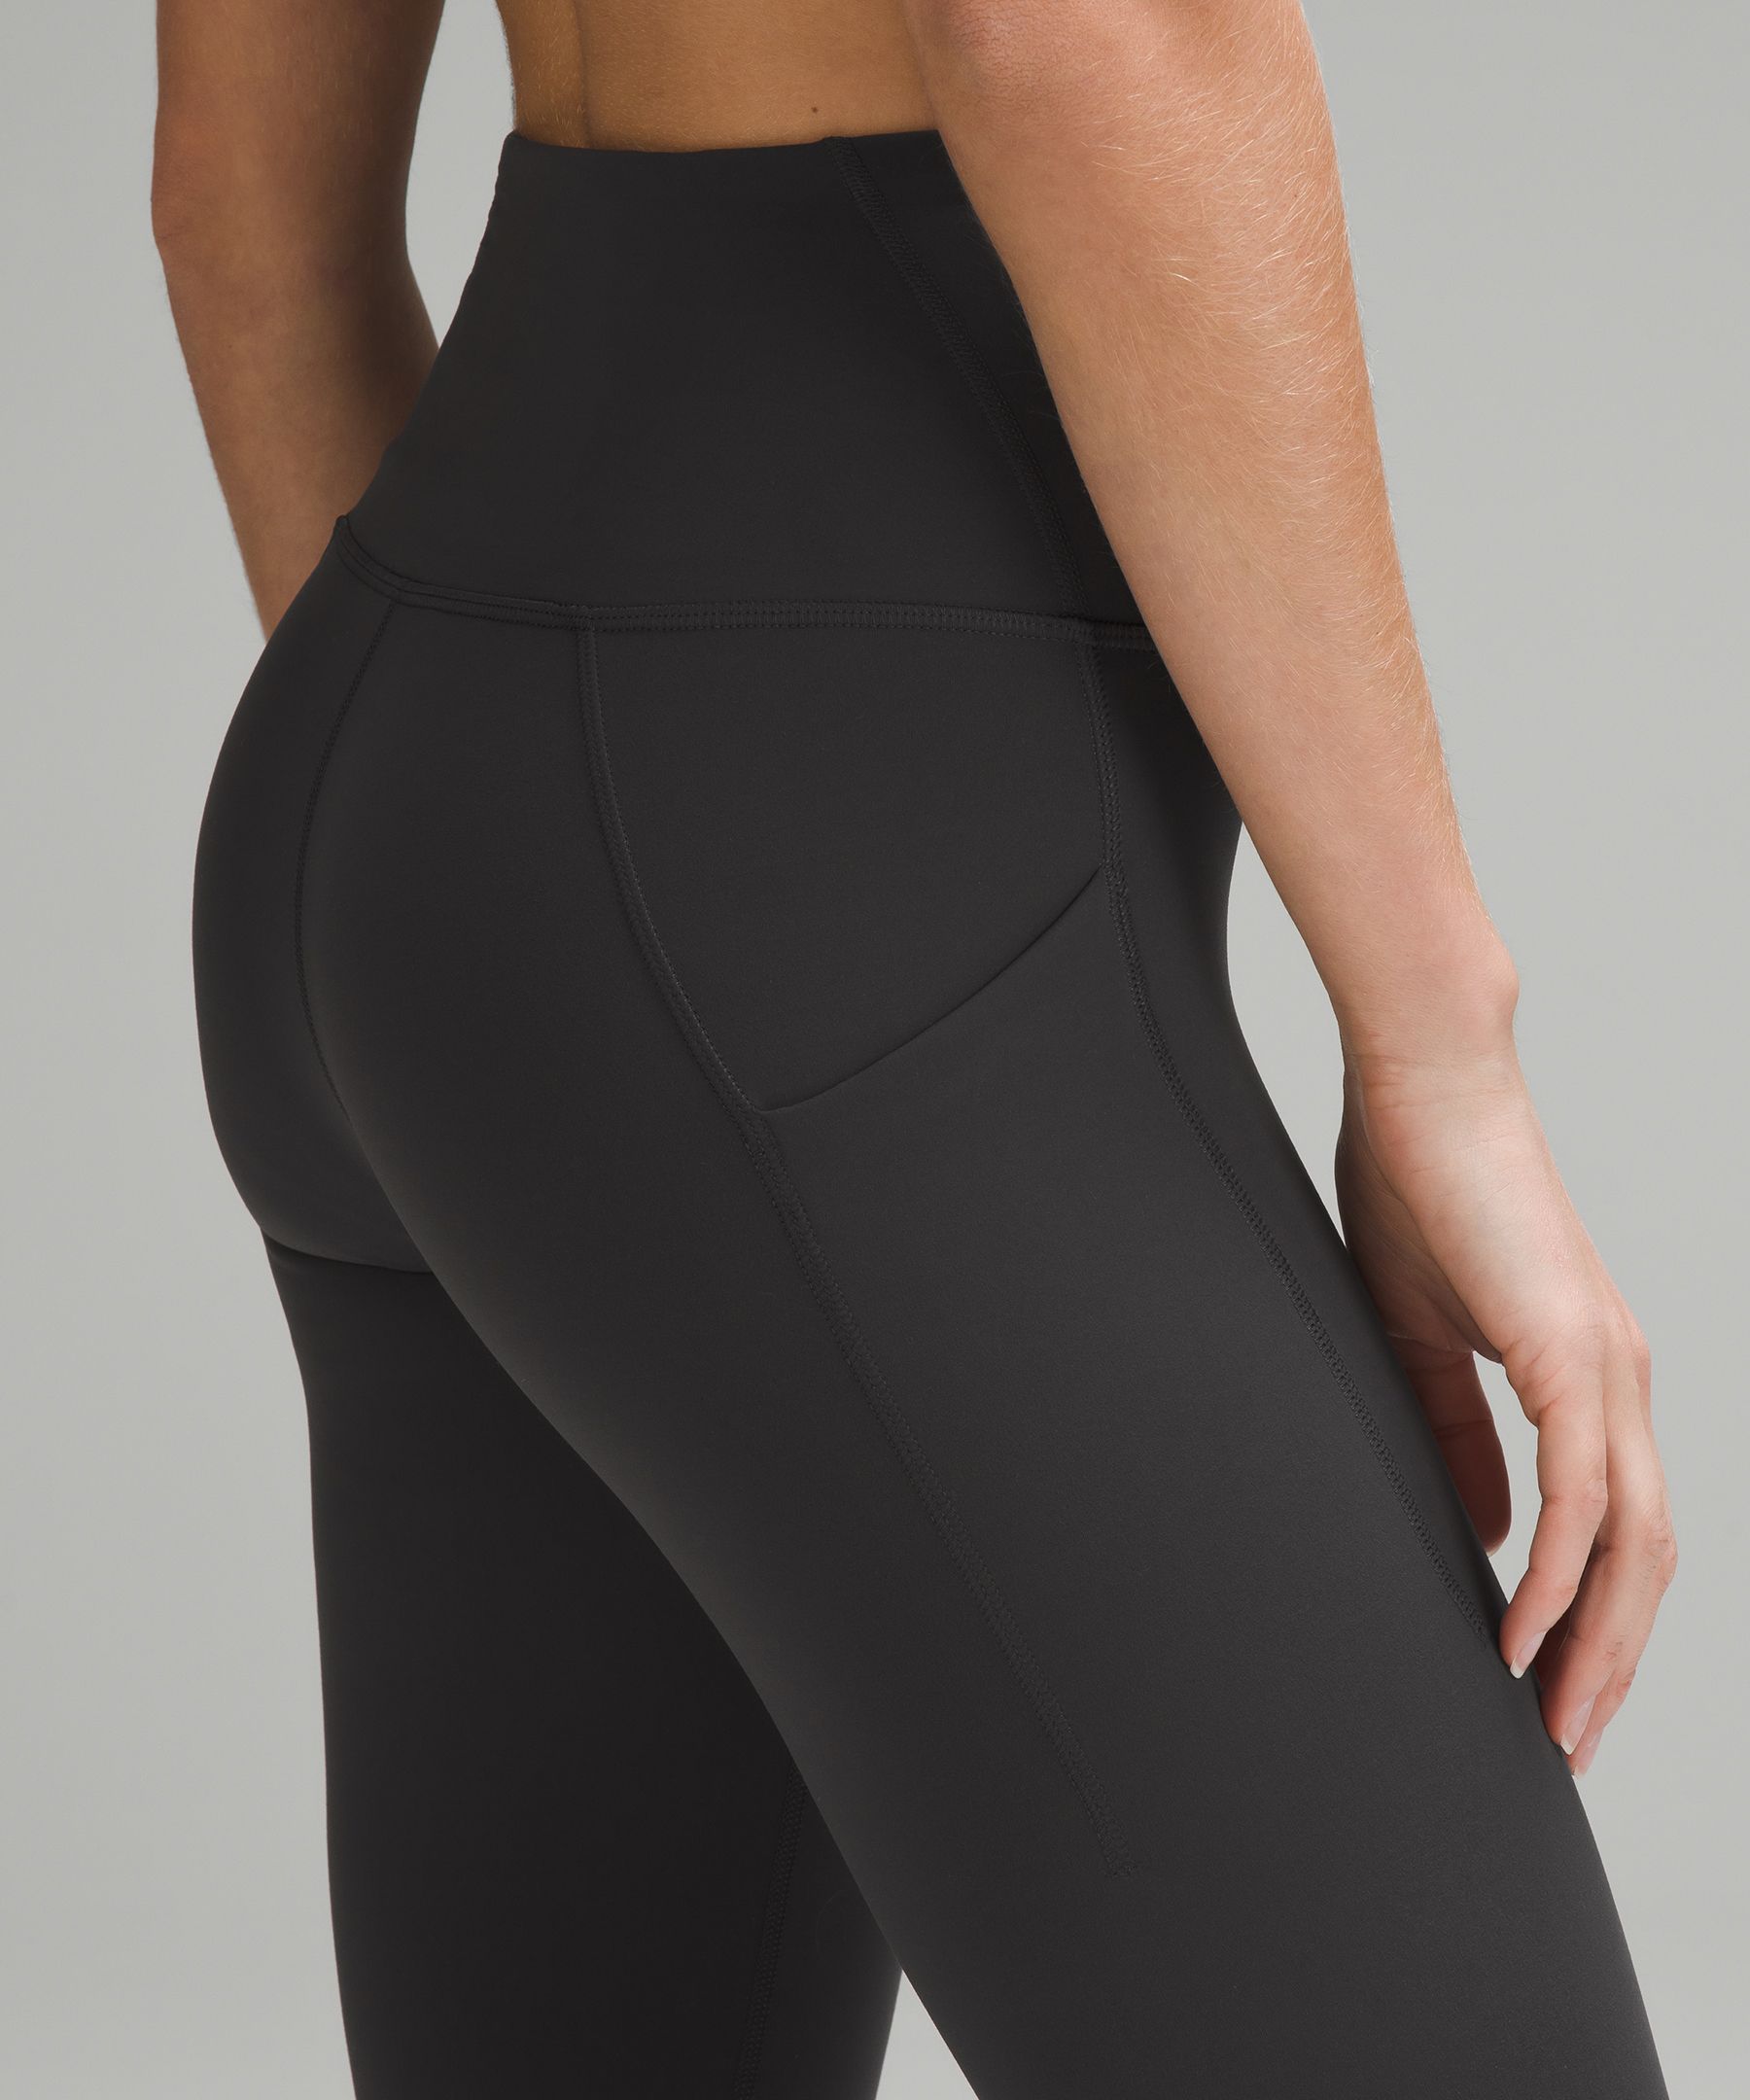 Lululemon Black and White Mosaic with Side Pockets Full Length Legging –  The Saved Collection